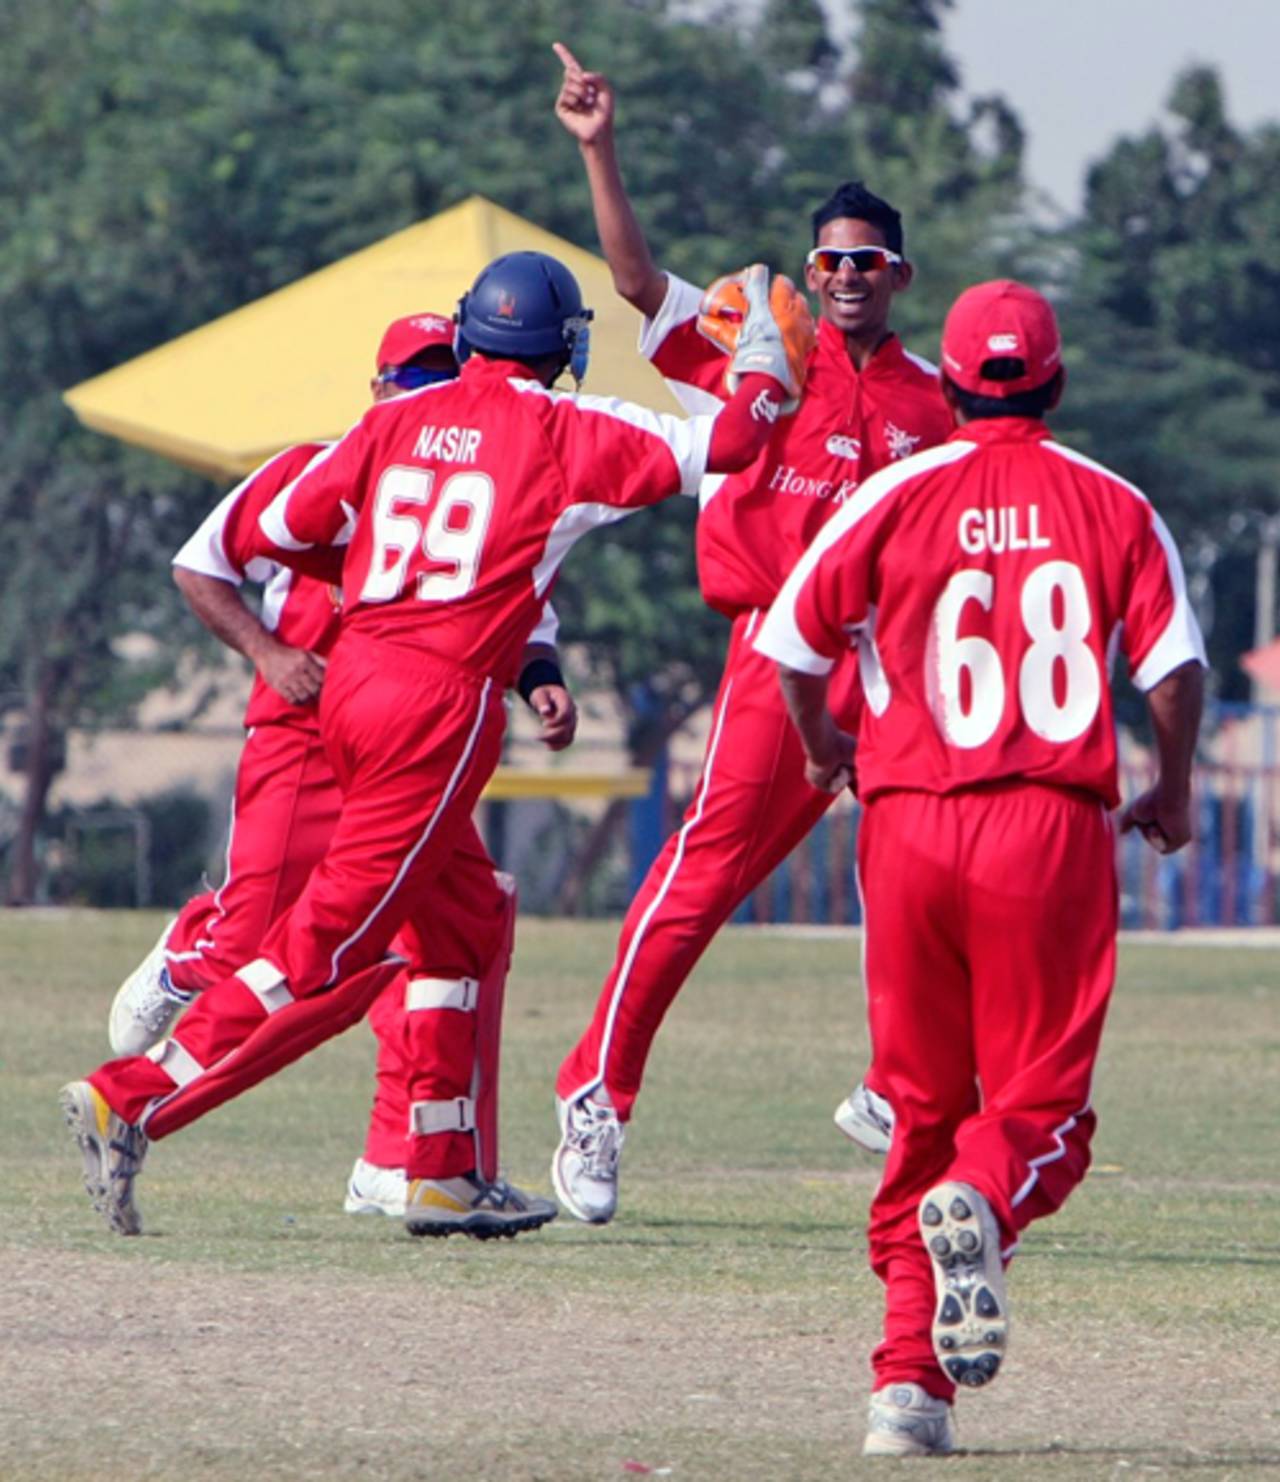 Nadeem Ahmed celebrates one of his five wickets against Singapore at the ACC Trophy Elite 2010 being played in Kuwait